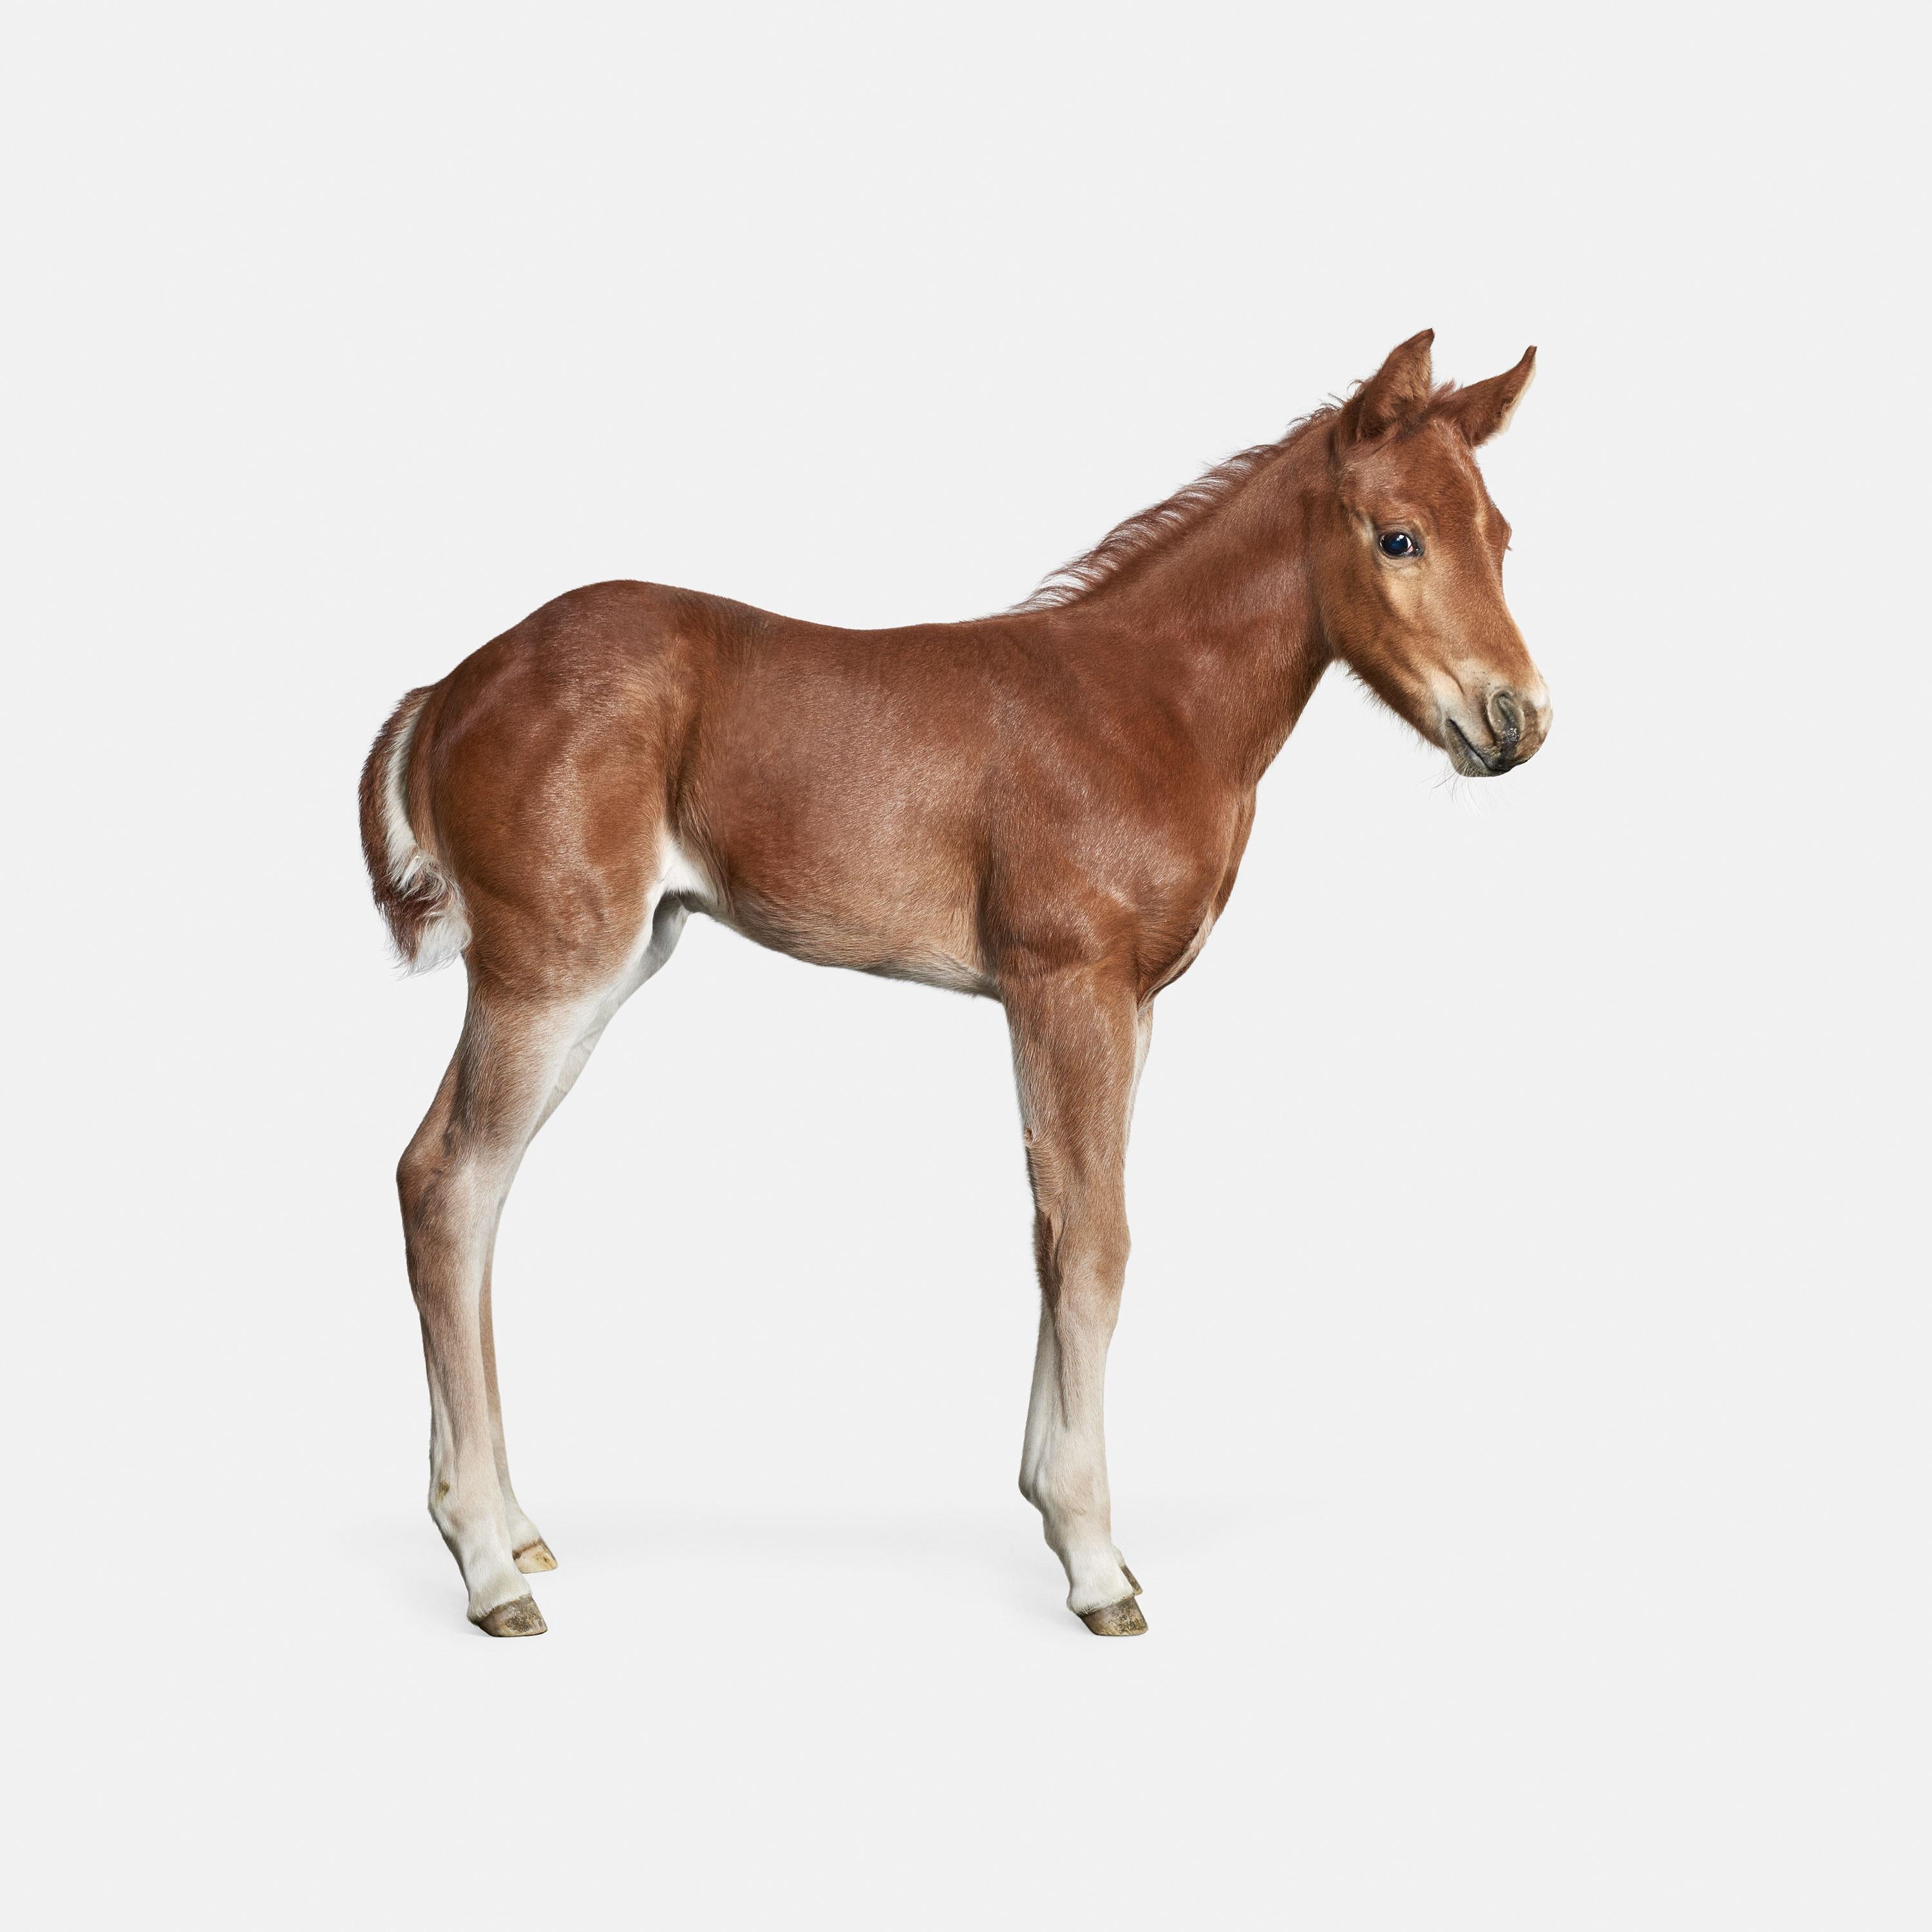 Available Sizes:
37.5 x 30 in Edition of 15
50 x 40 in Edition of 10
60 x 48 in Edition of 5

Weston: There are few things more adorable than a baby horse.  28-day-old Weston and his ridiculously cute gallop would make even the manliest of men